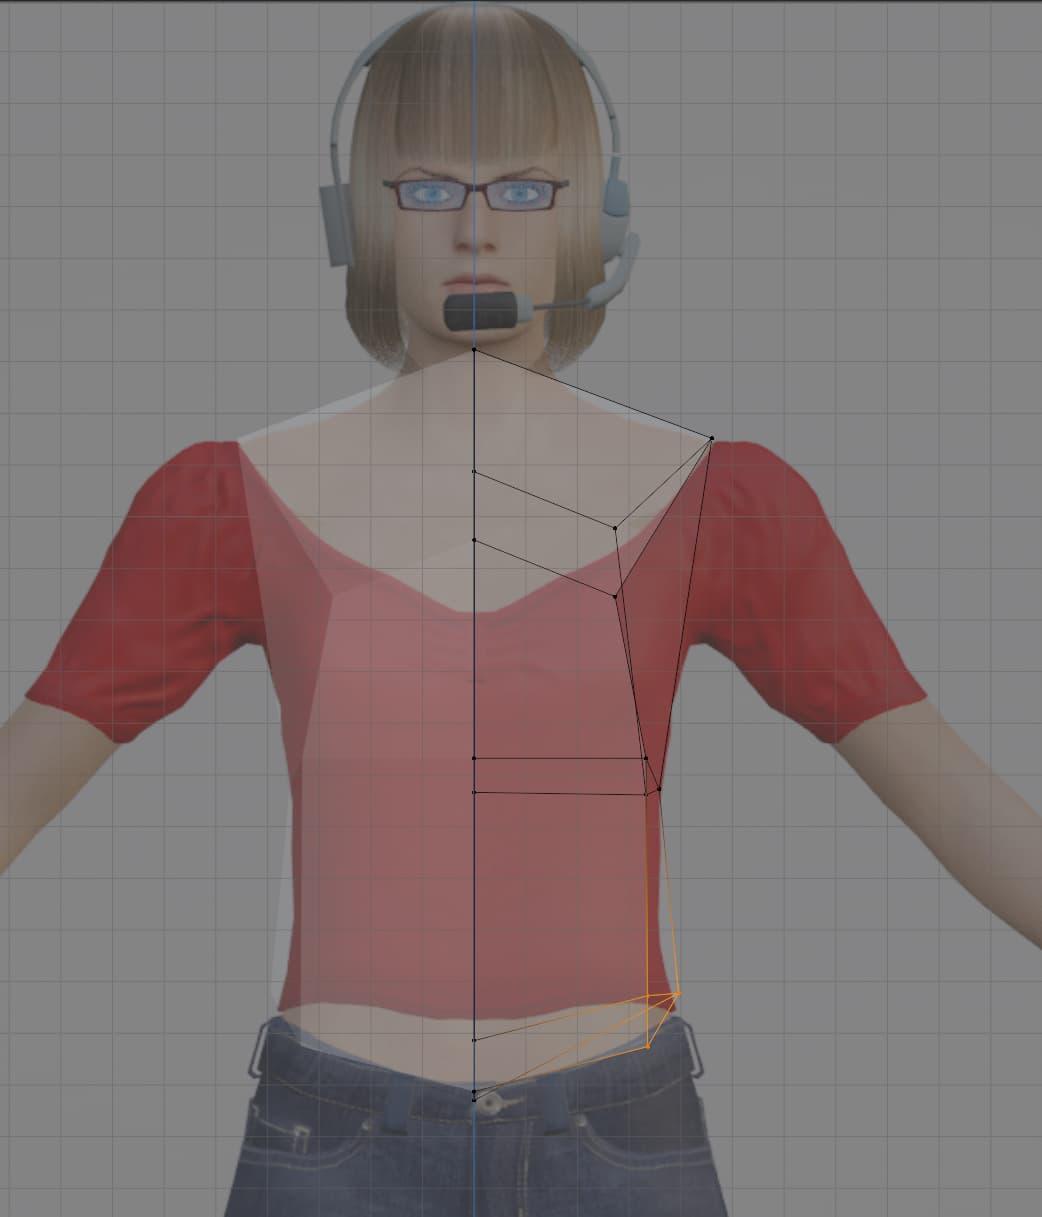 Overlaid on top of an image of a blonde woman with a red shirt, a prism-like geometric shape has been constructed with multiple points matching the neck, shoulders, and body profile